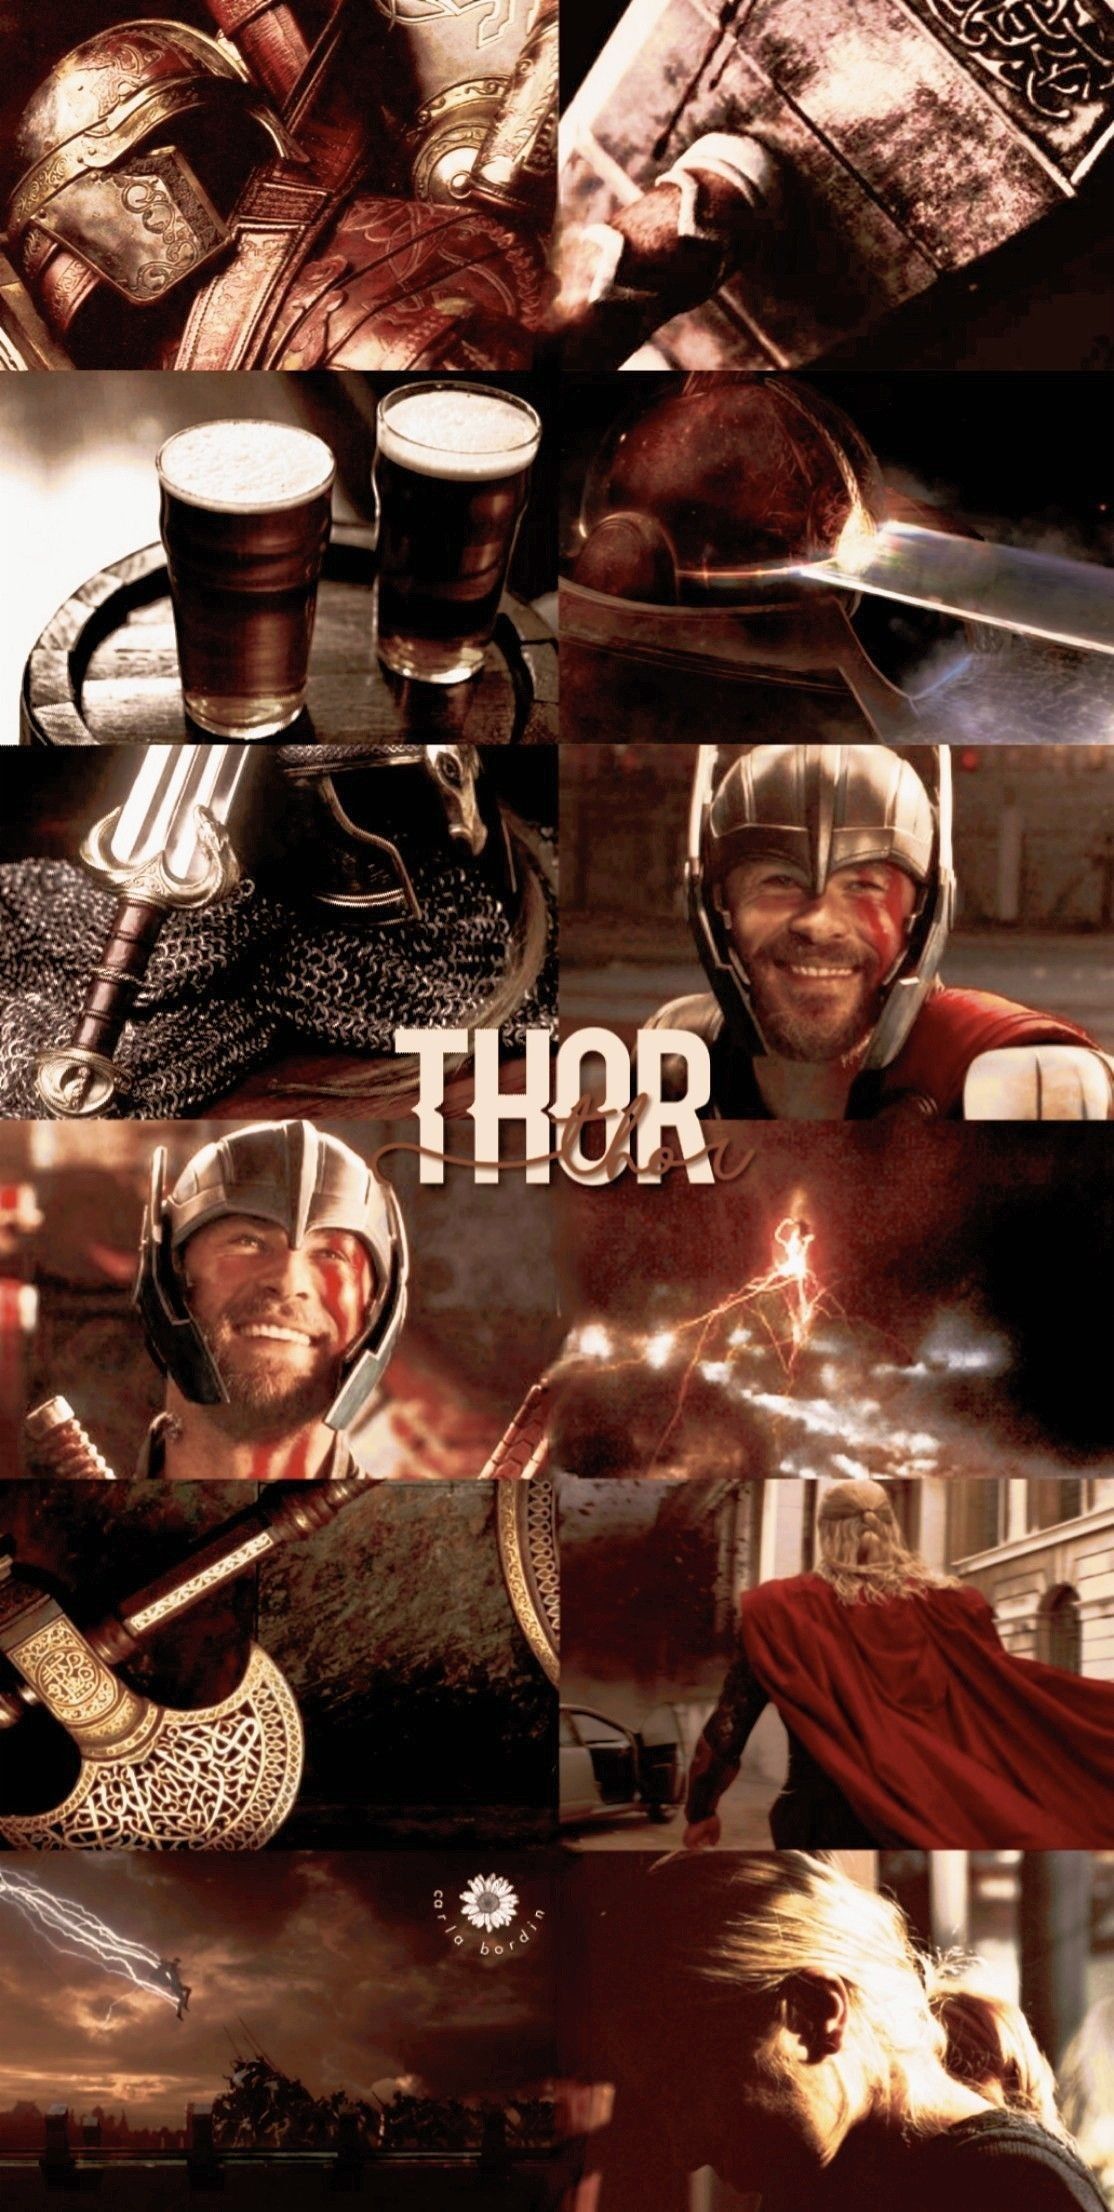 Thor wallpaper for my phone - Thor